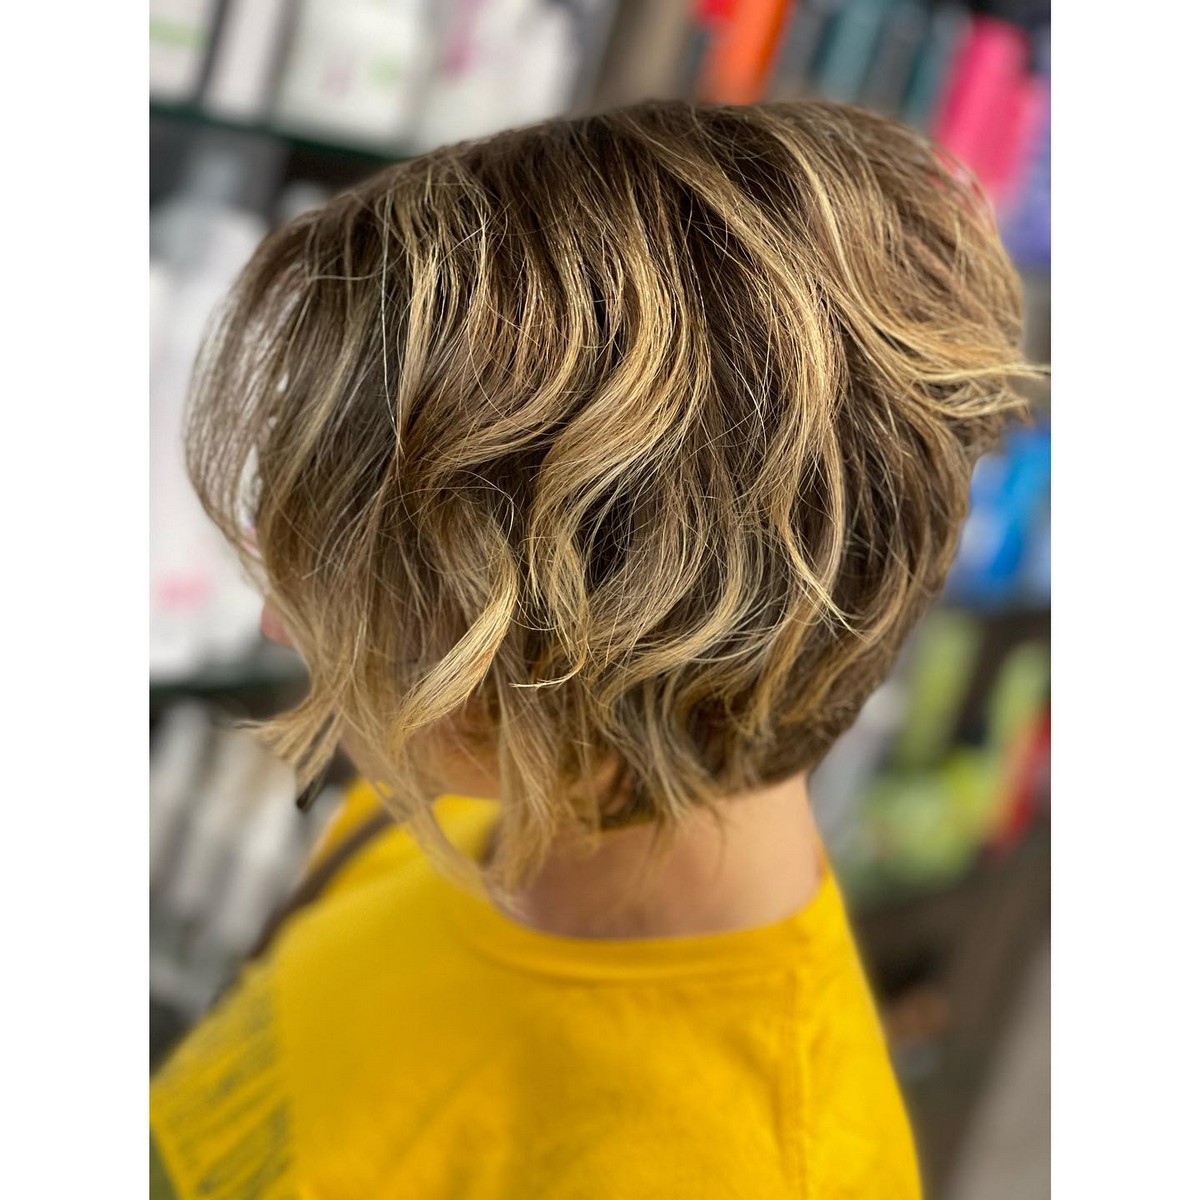 Long Layered Pixie With Highlights